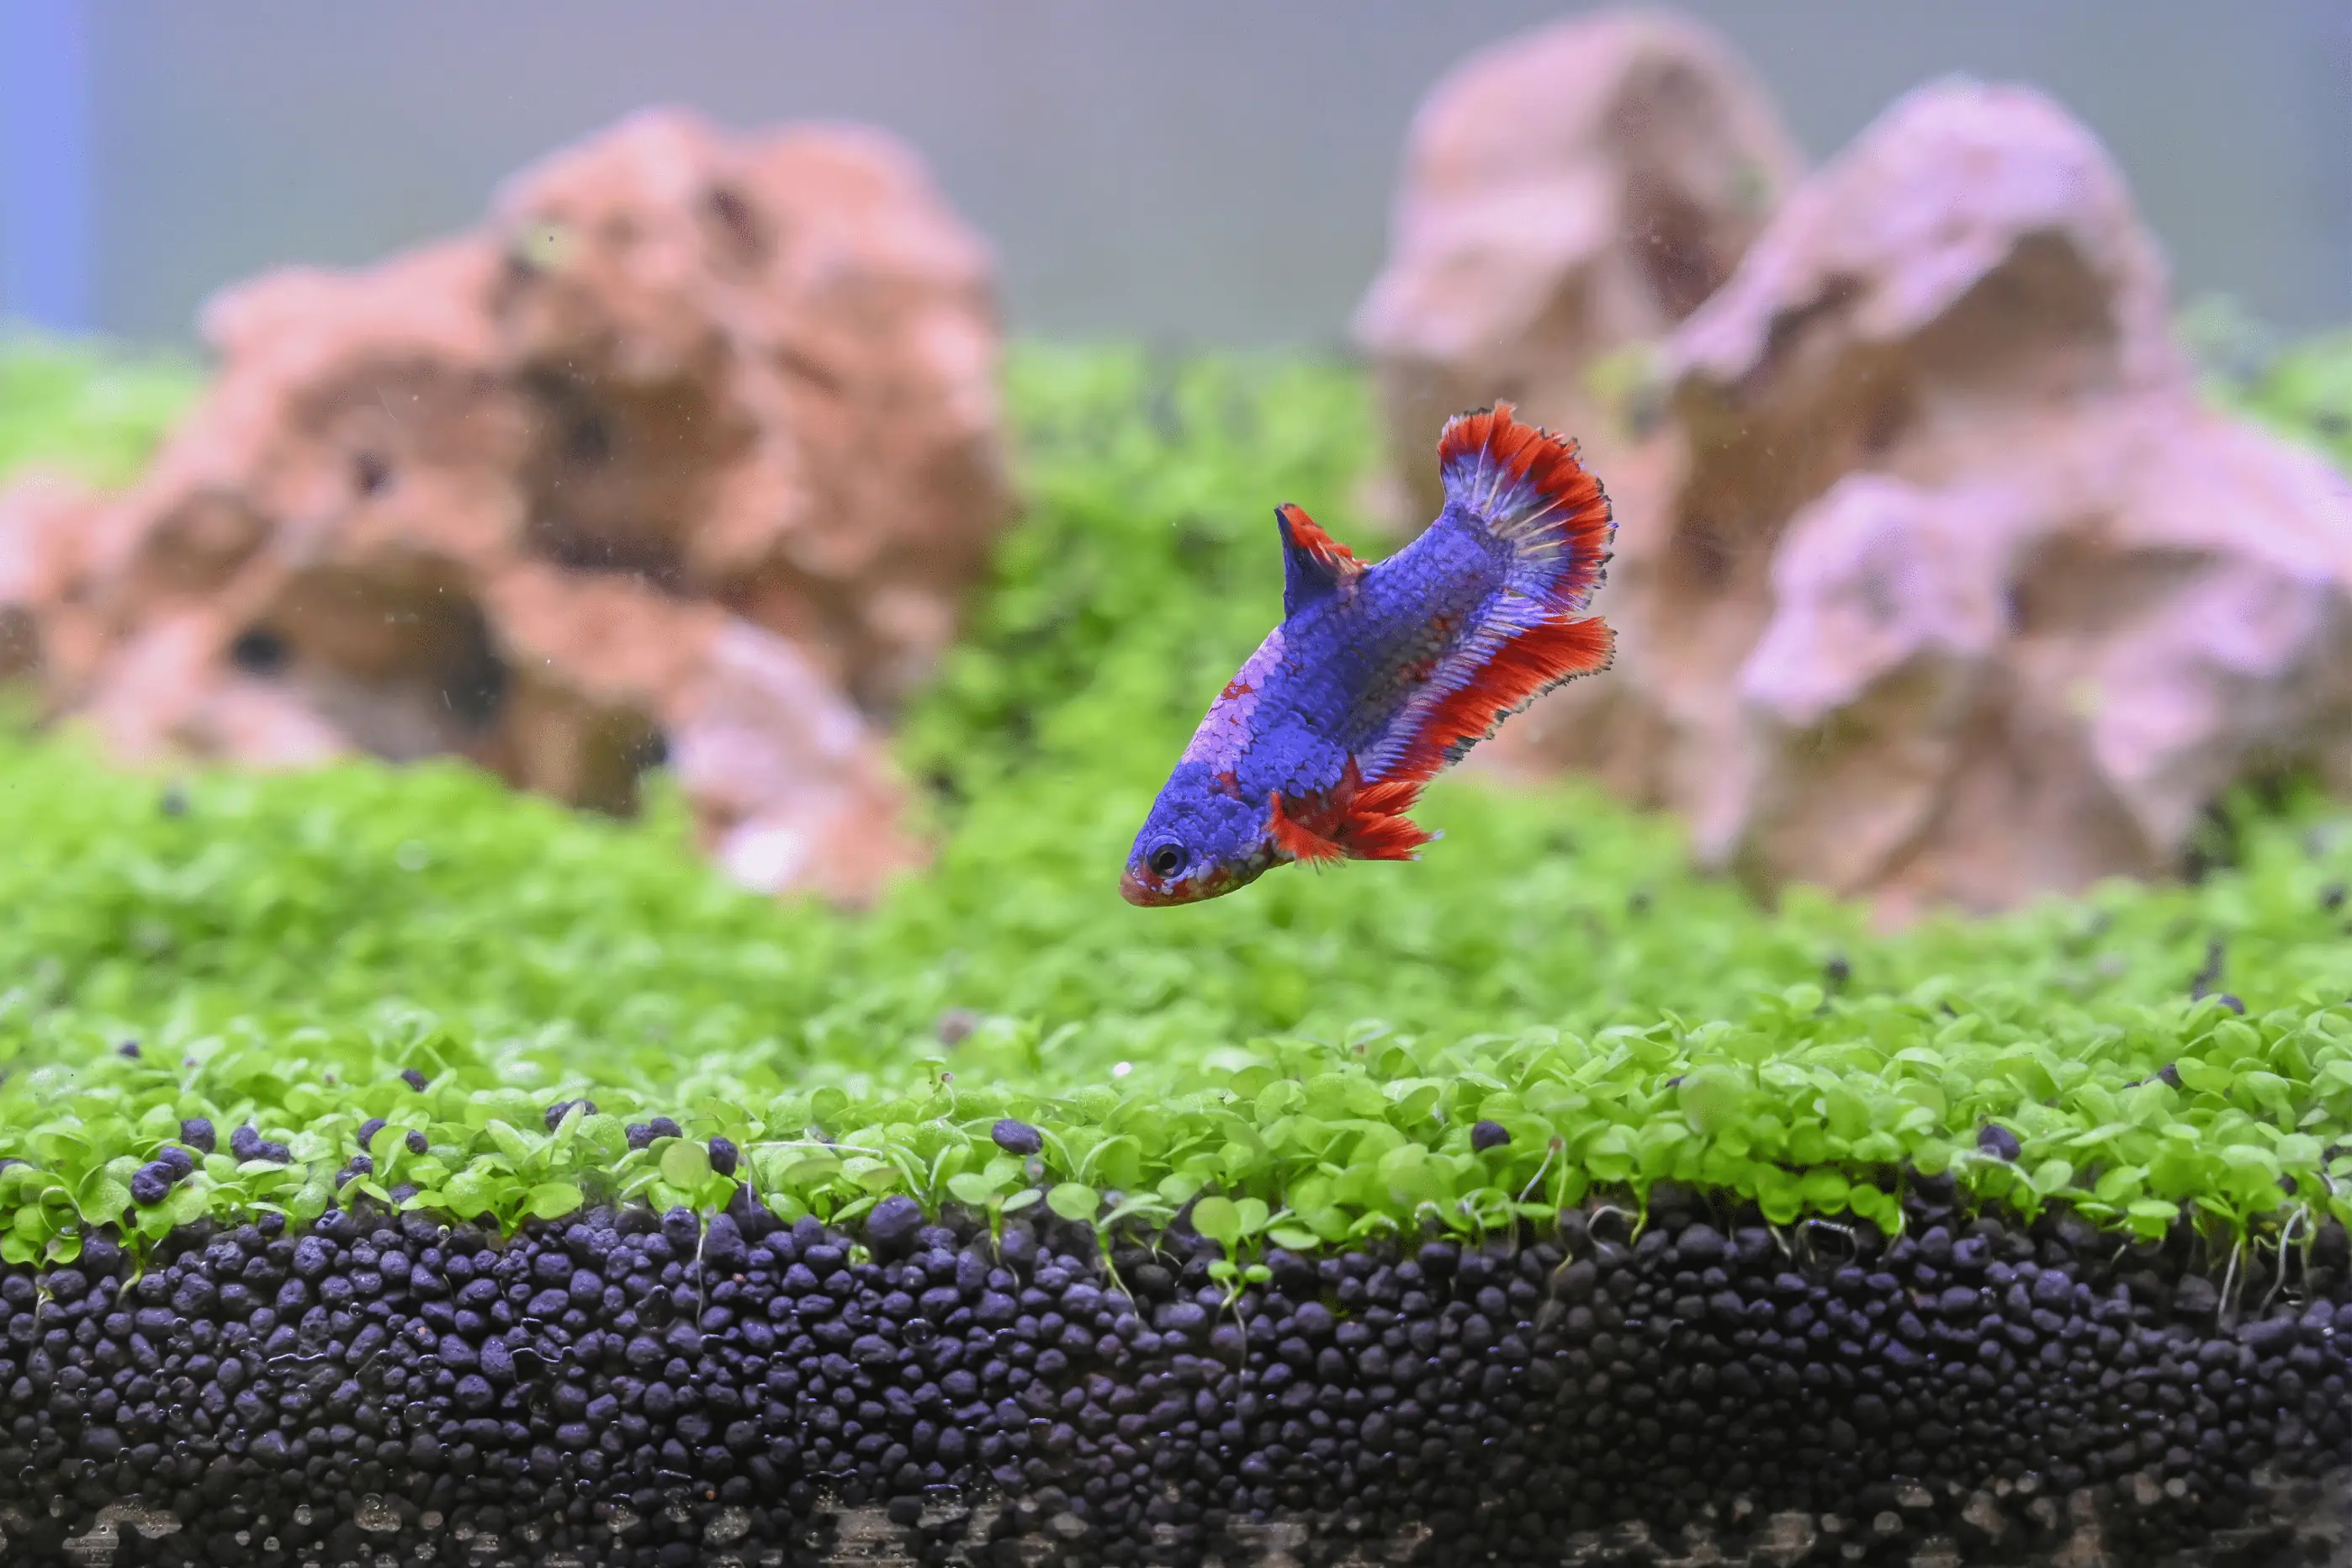 best substrate for betta fish